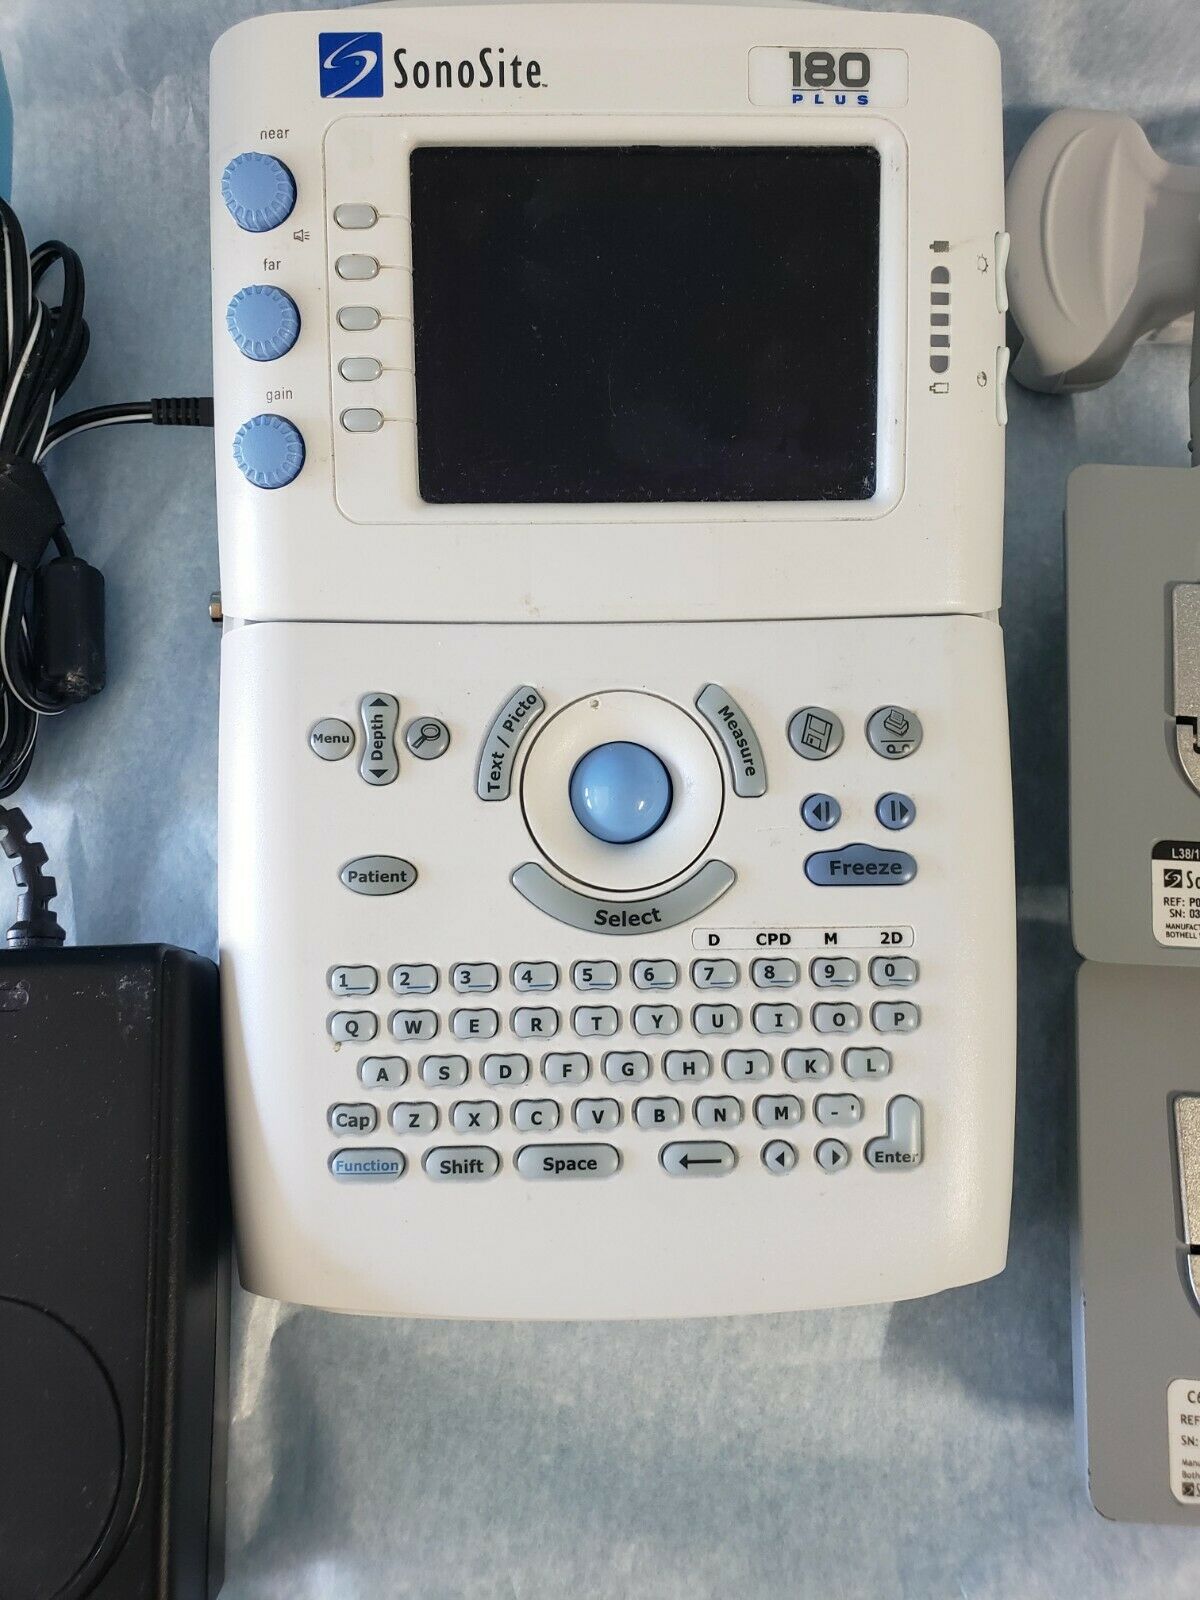 SONOSITE 180 PLUS ULTRASOUND MACHINE WITH 2 TRANSDUCERS DIAGNOSTIC ULTRASOUND MACHINES FOR SALE